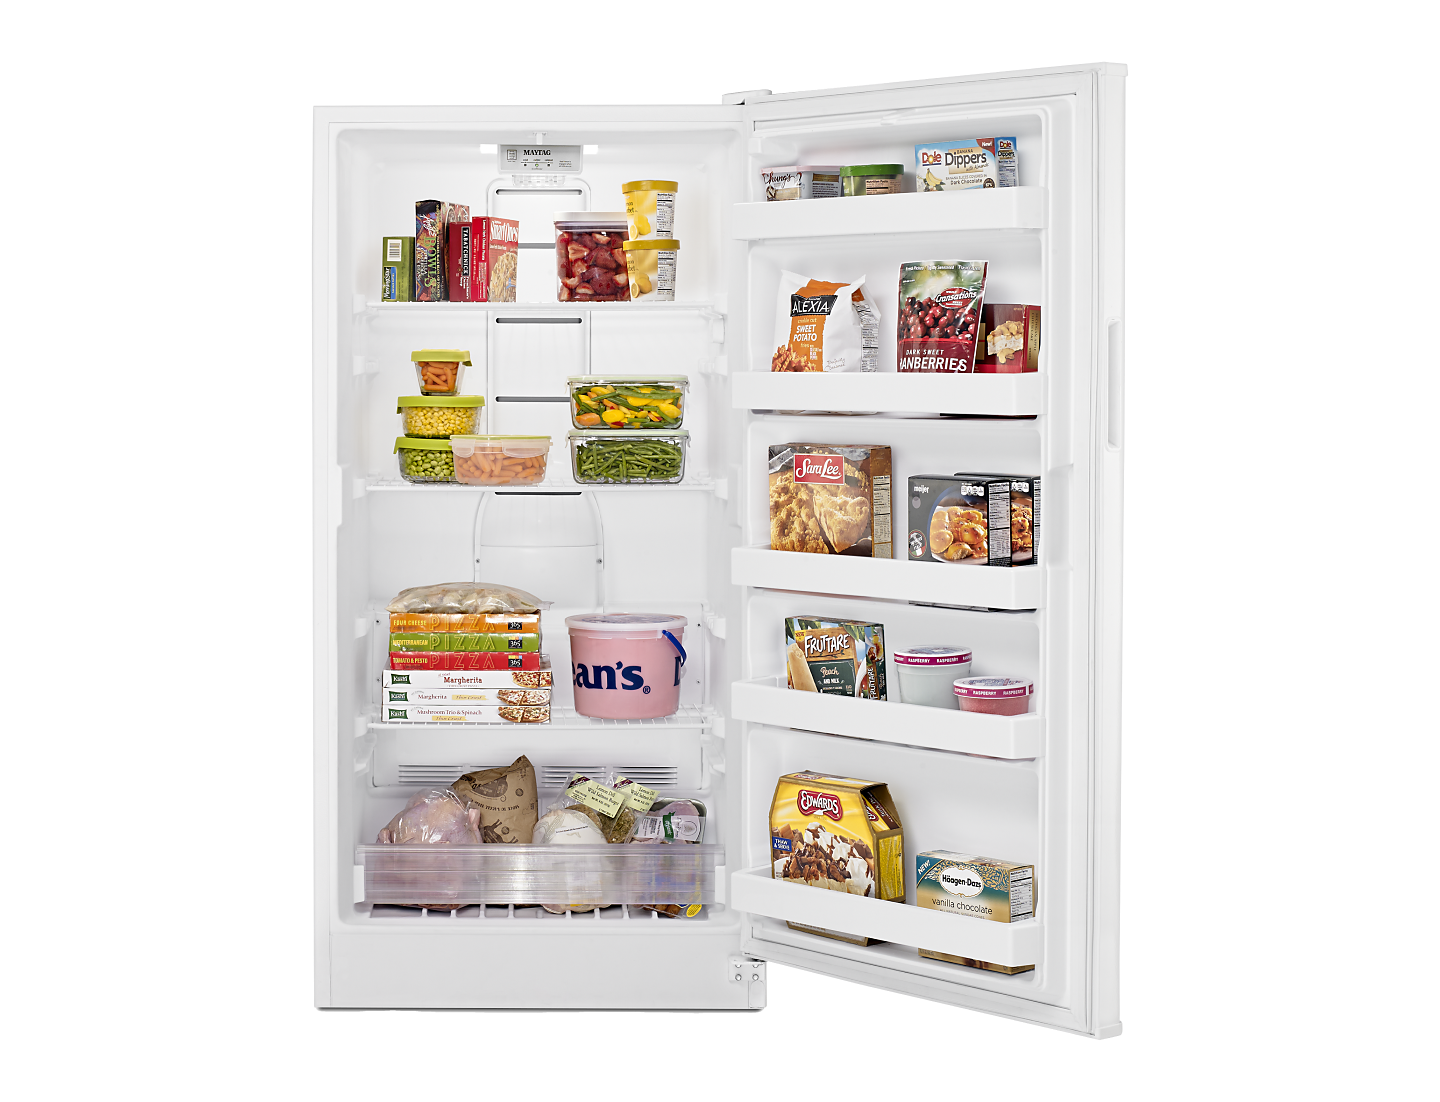 Upright freezer or chest freezer: Which should you buy? - CNET